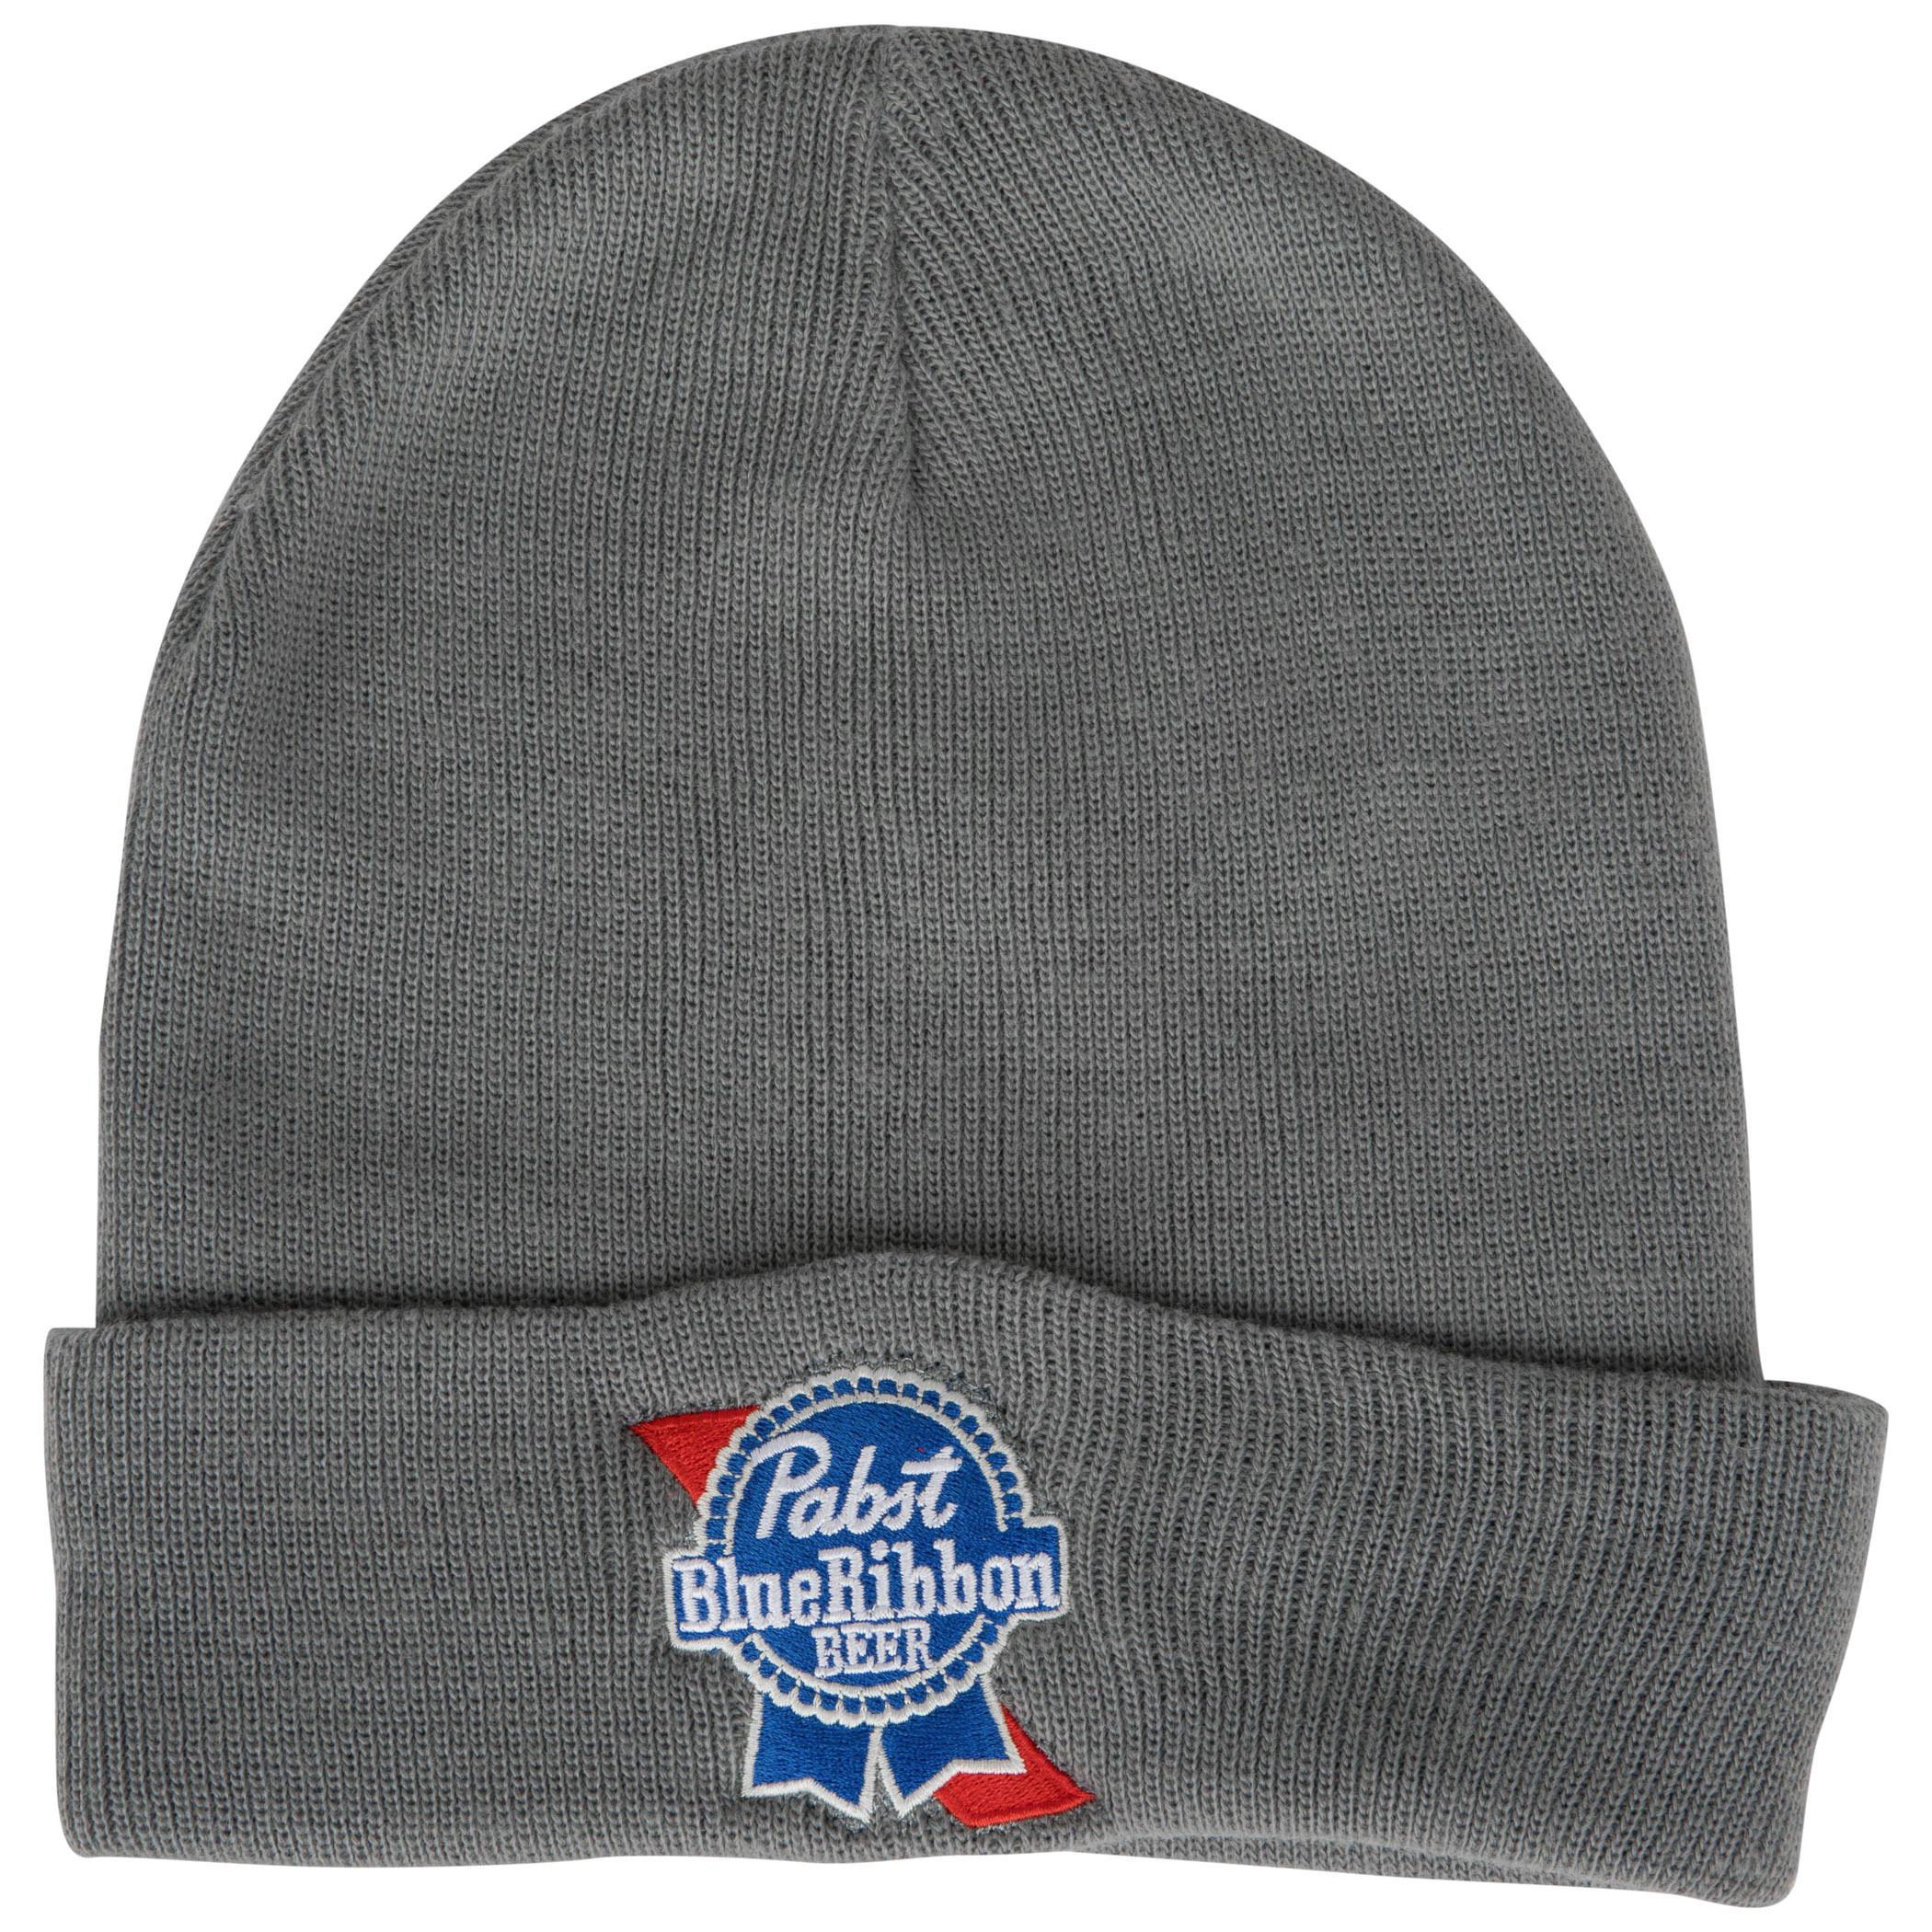 Pabst Blue Ribbon Beer Logo Grey Colorway Cuffed Knit Beanie